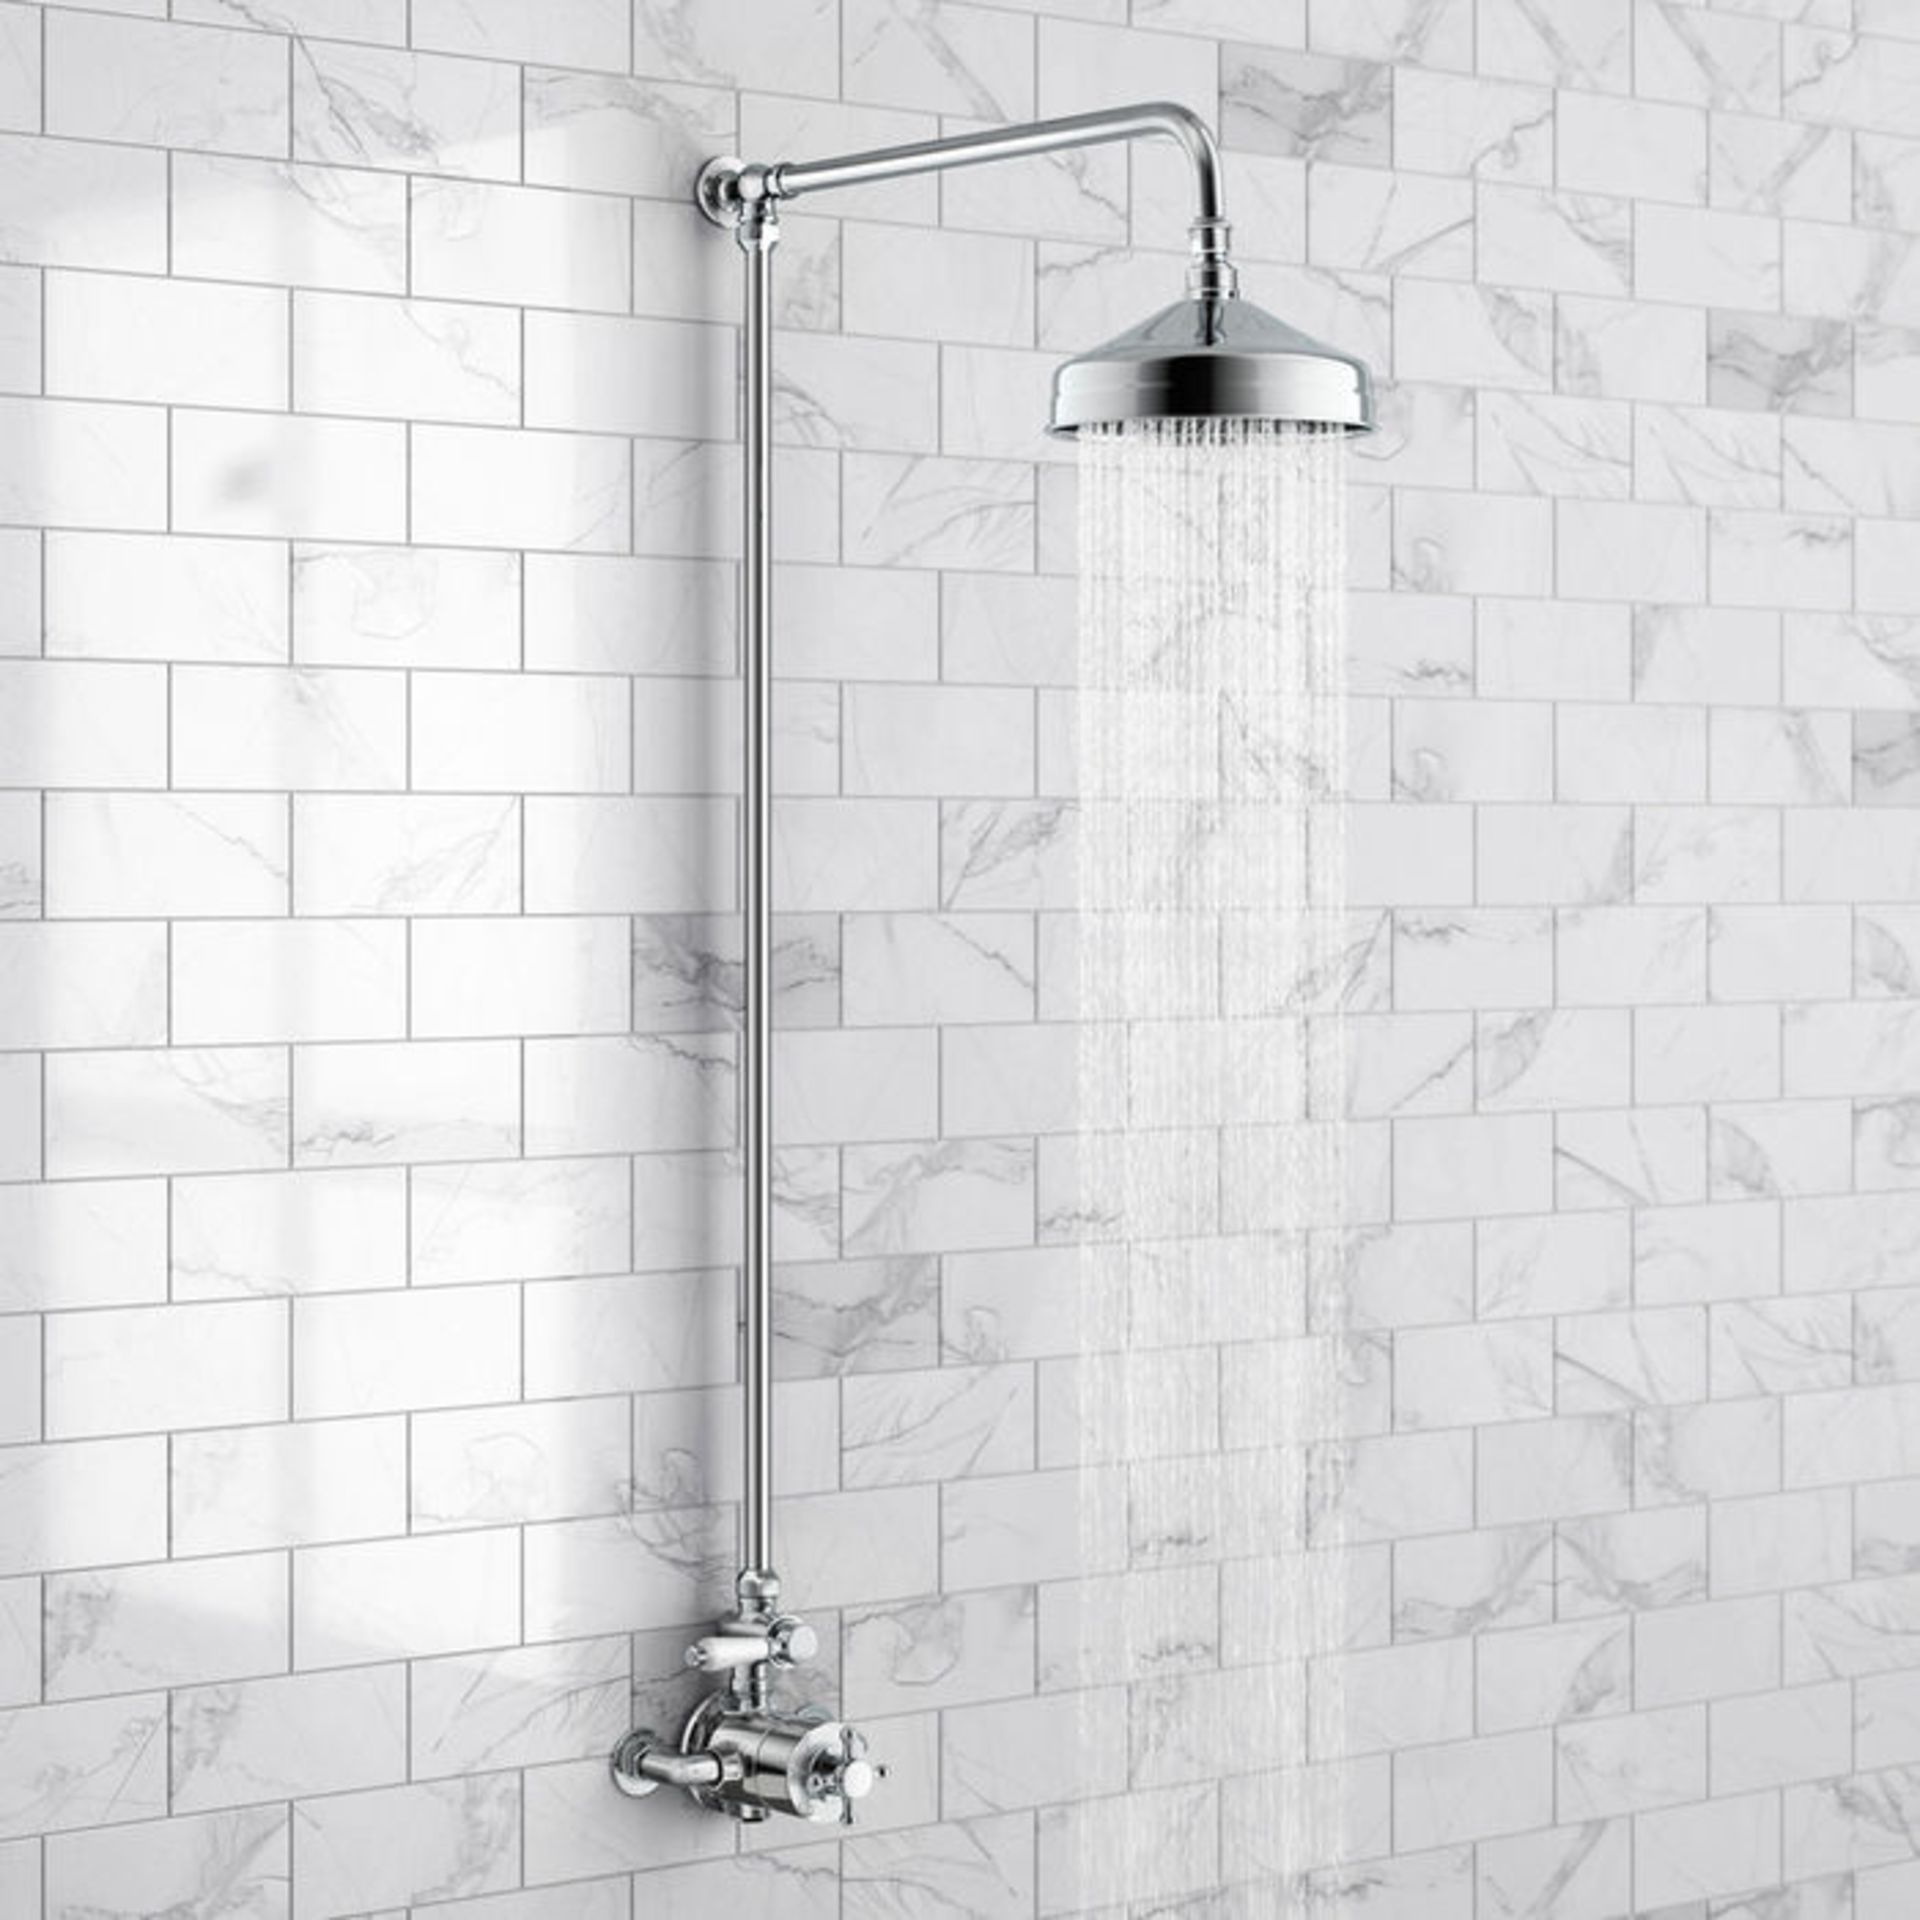 (MT222) Traditional Exposed Thermostatic Shower Kit & Medium Head. Traditional exposed valve